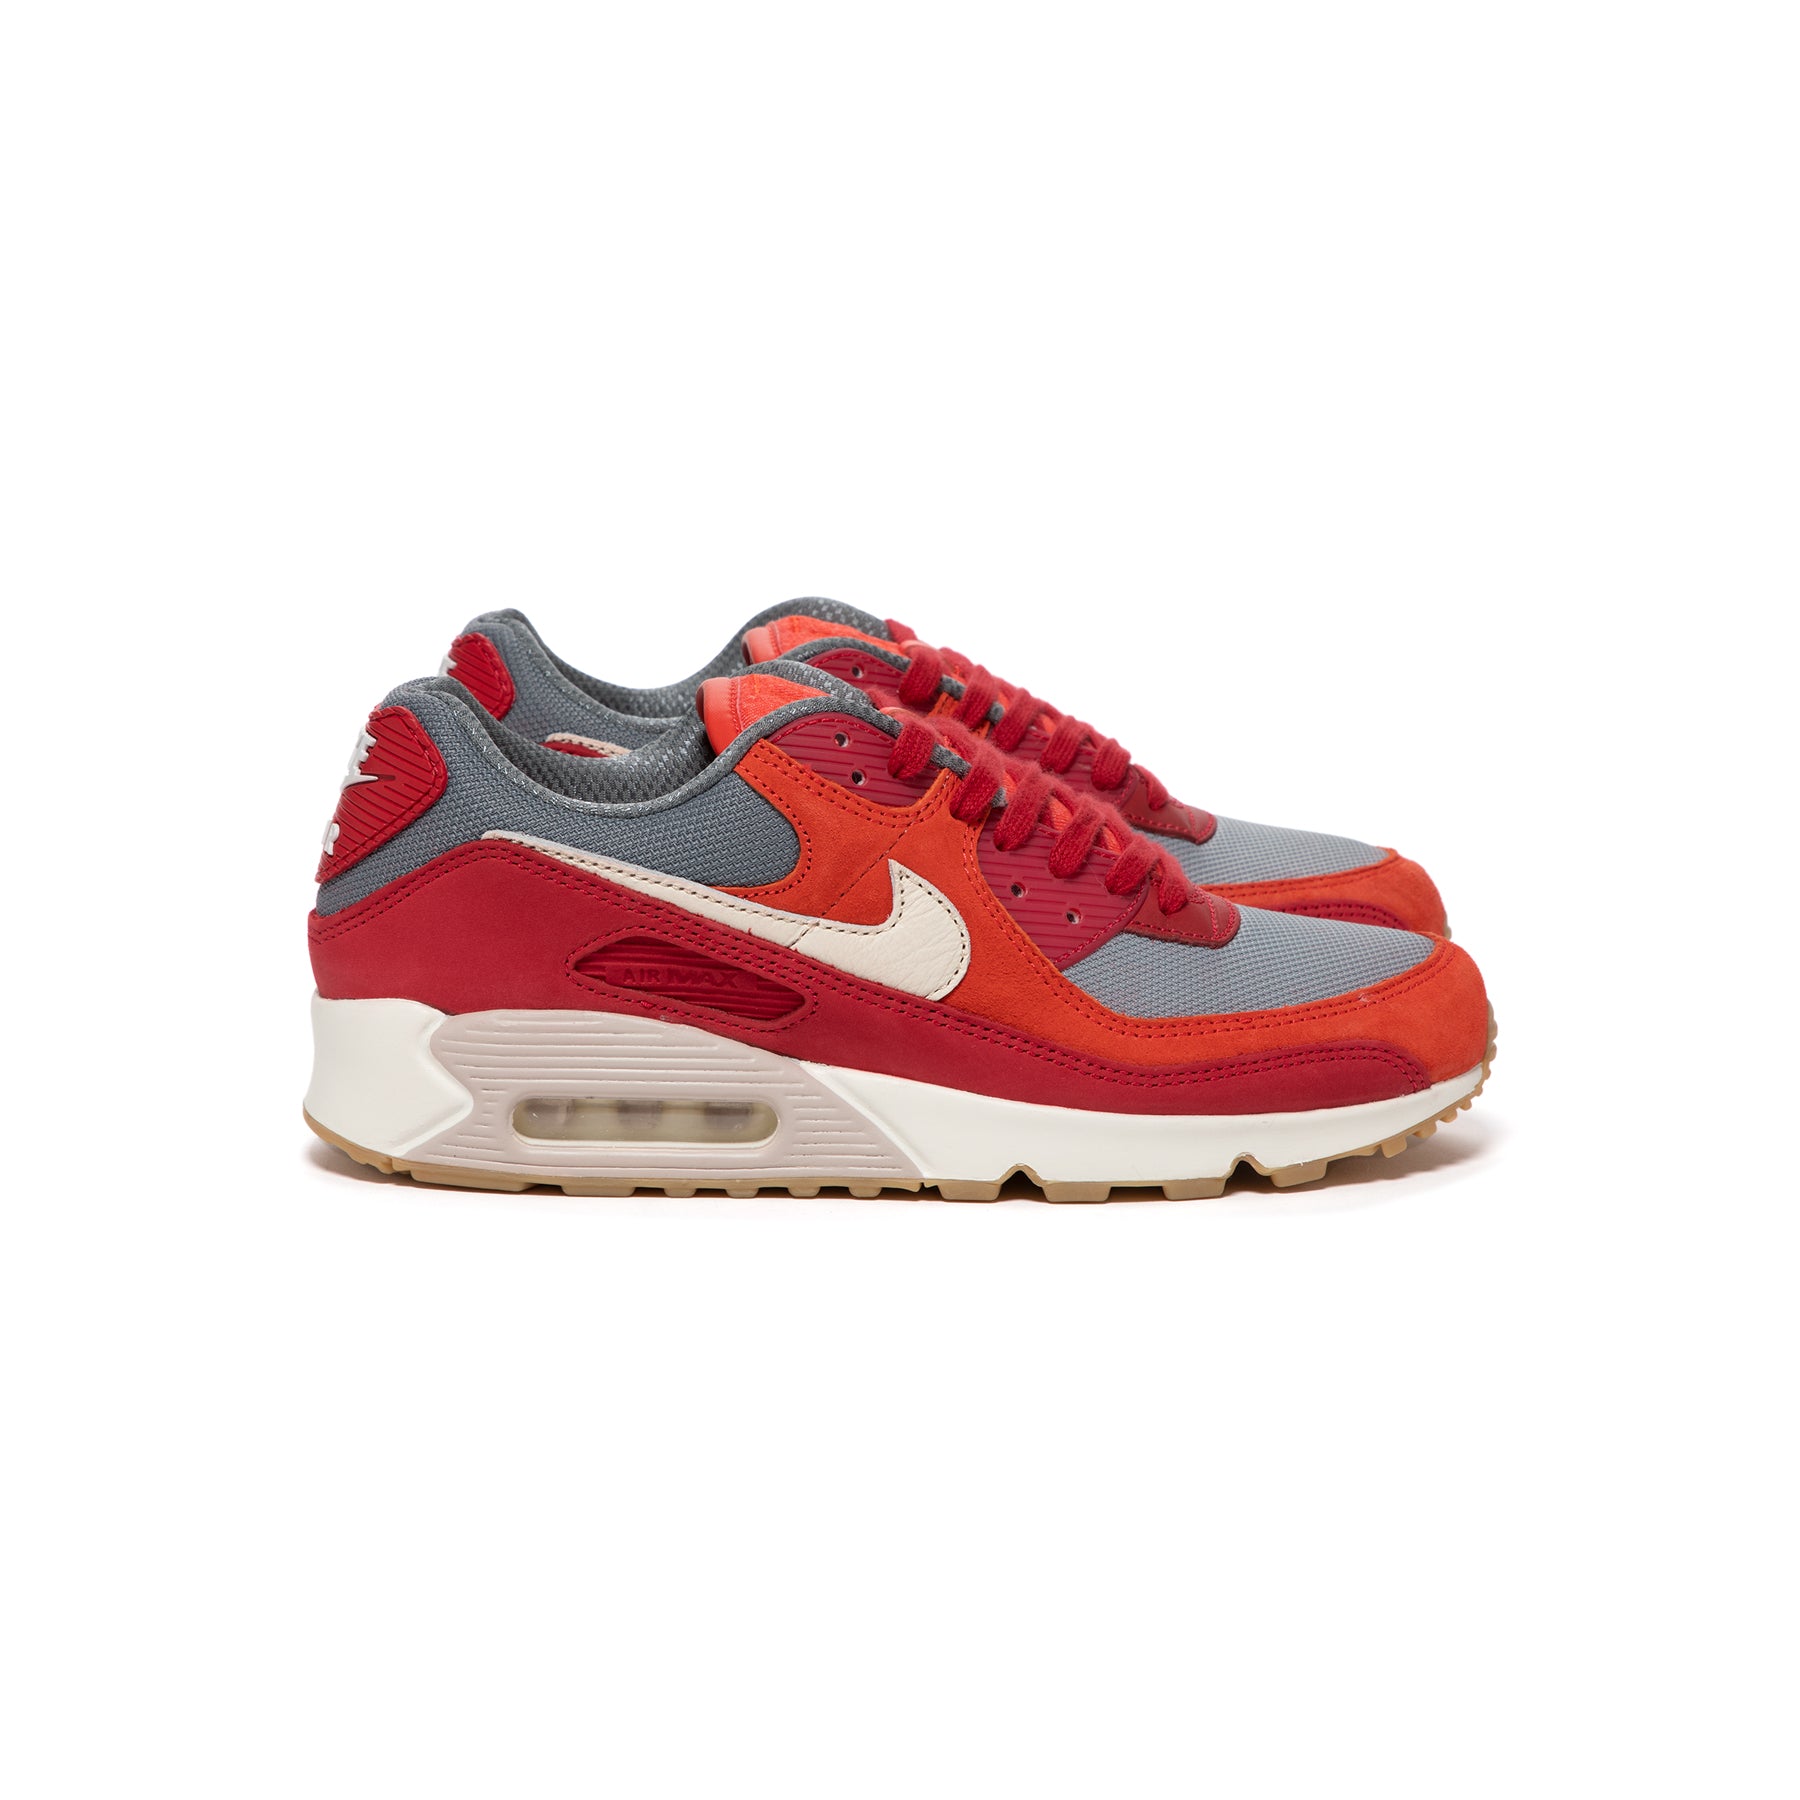 Nike Air Max 90 PRM (Gym Red/Pale Ivory/Habanero Red) –